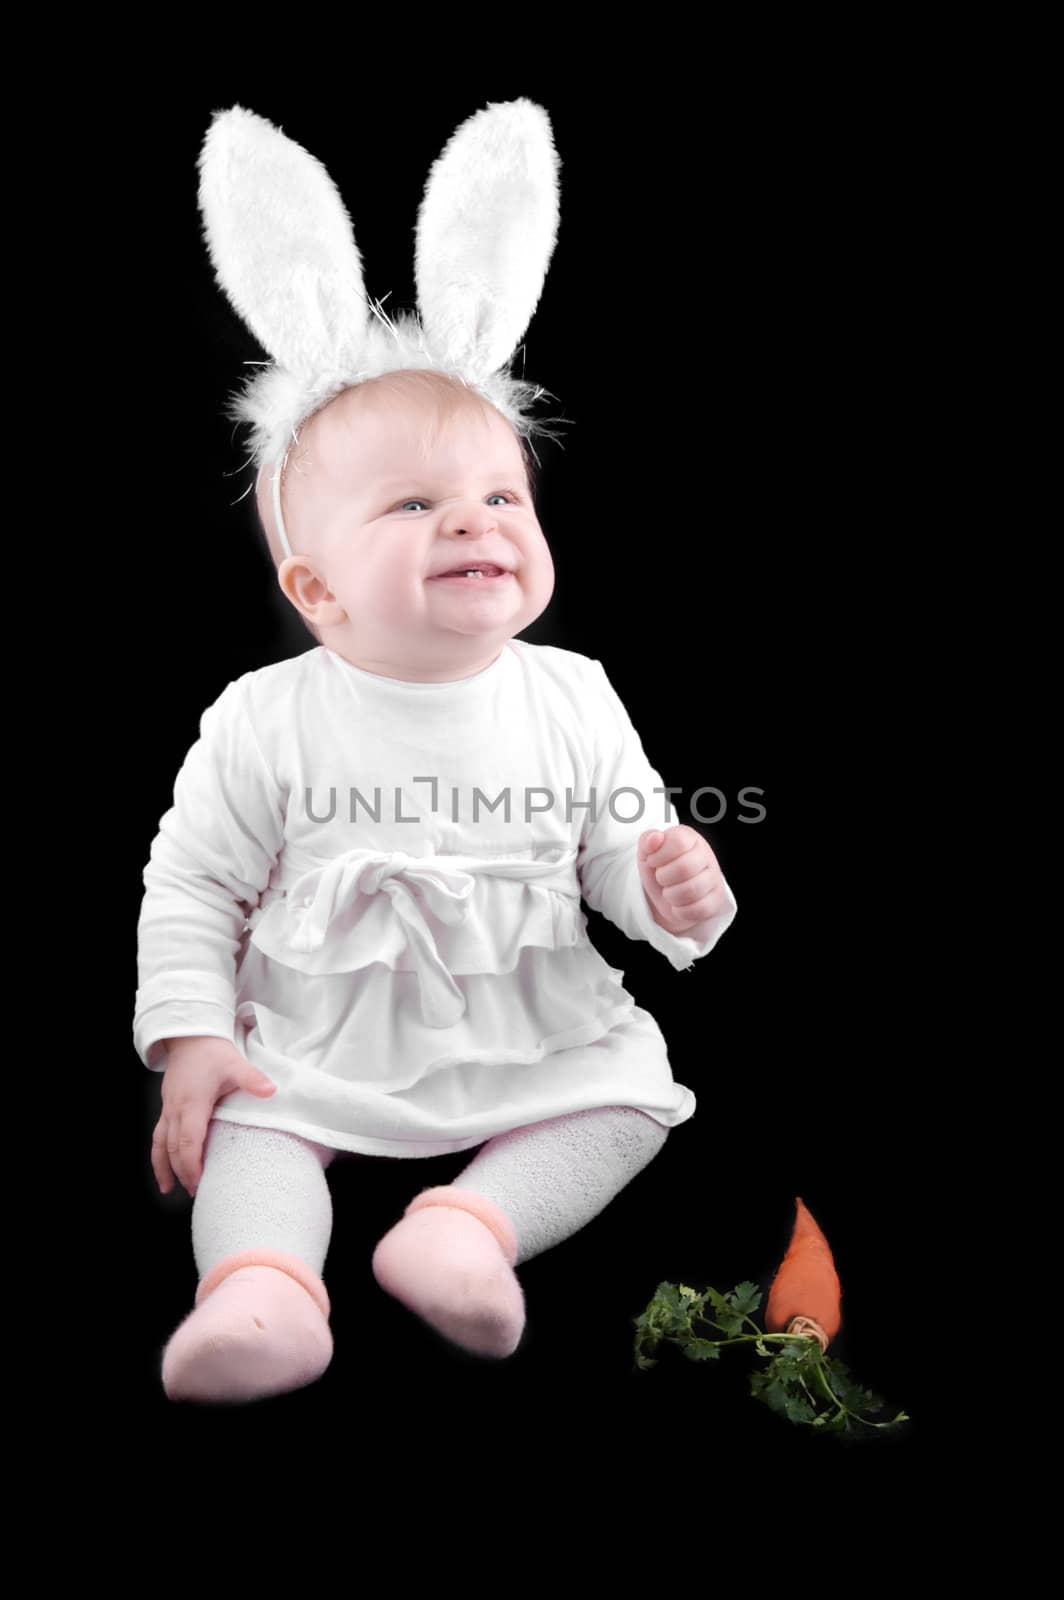 Funny baby in bunny costume and carrot on black